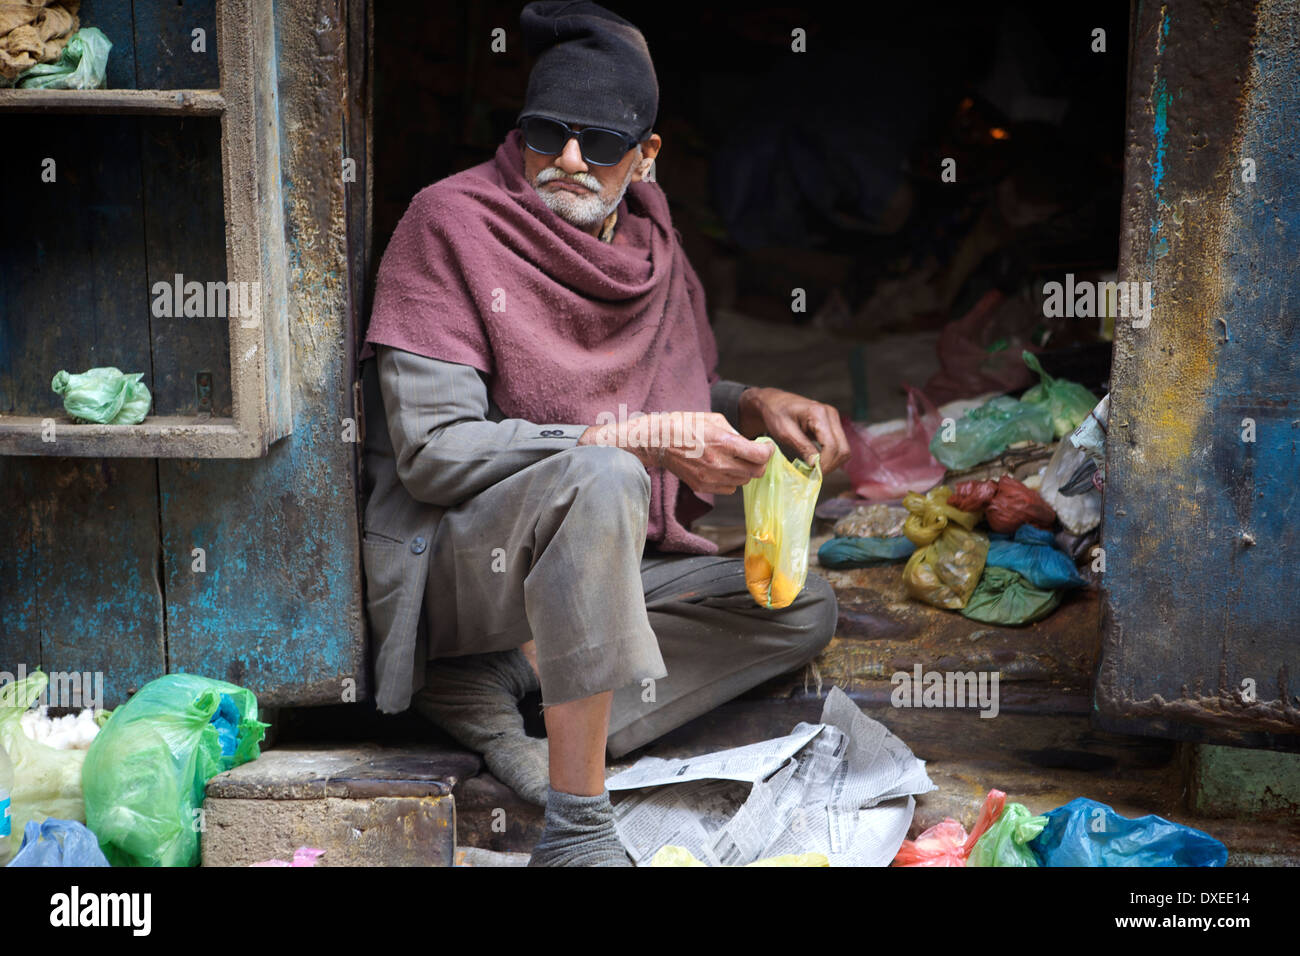 Old Indian man selling his goods Stock Photo